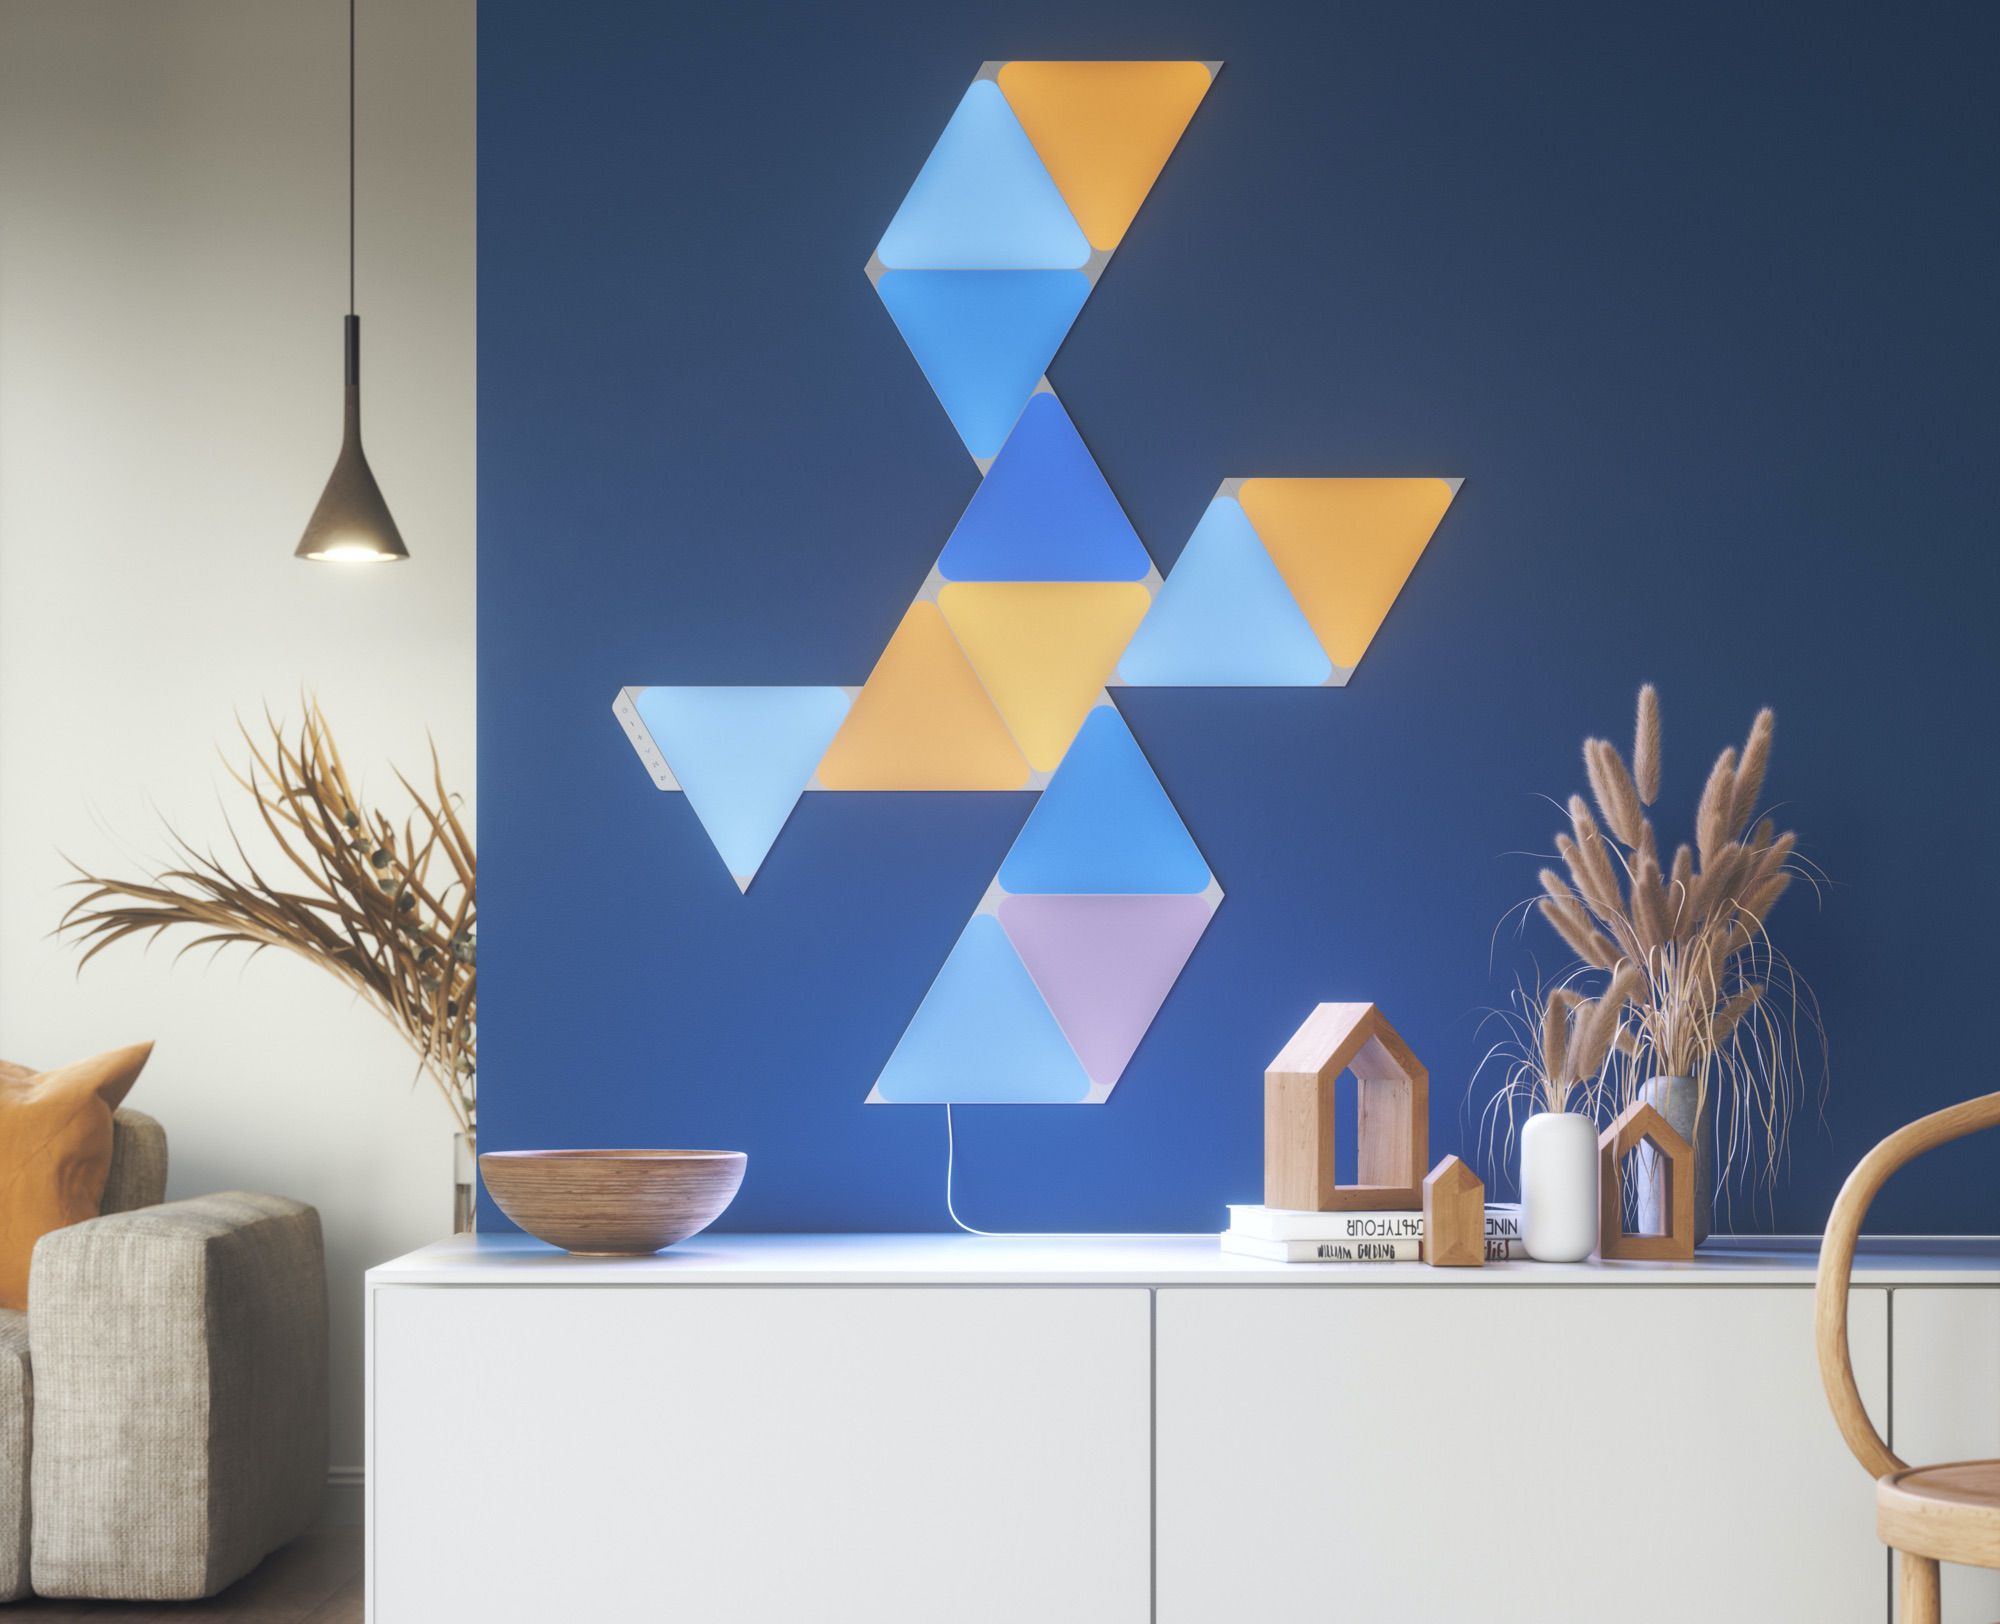 Nanoleaf Shapes Triangles and Triangles MacRumors Review - Mini